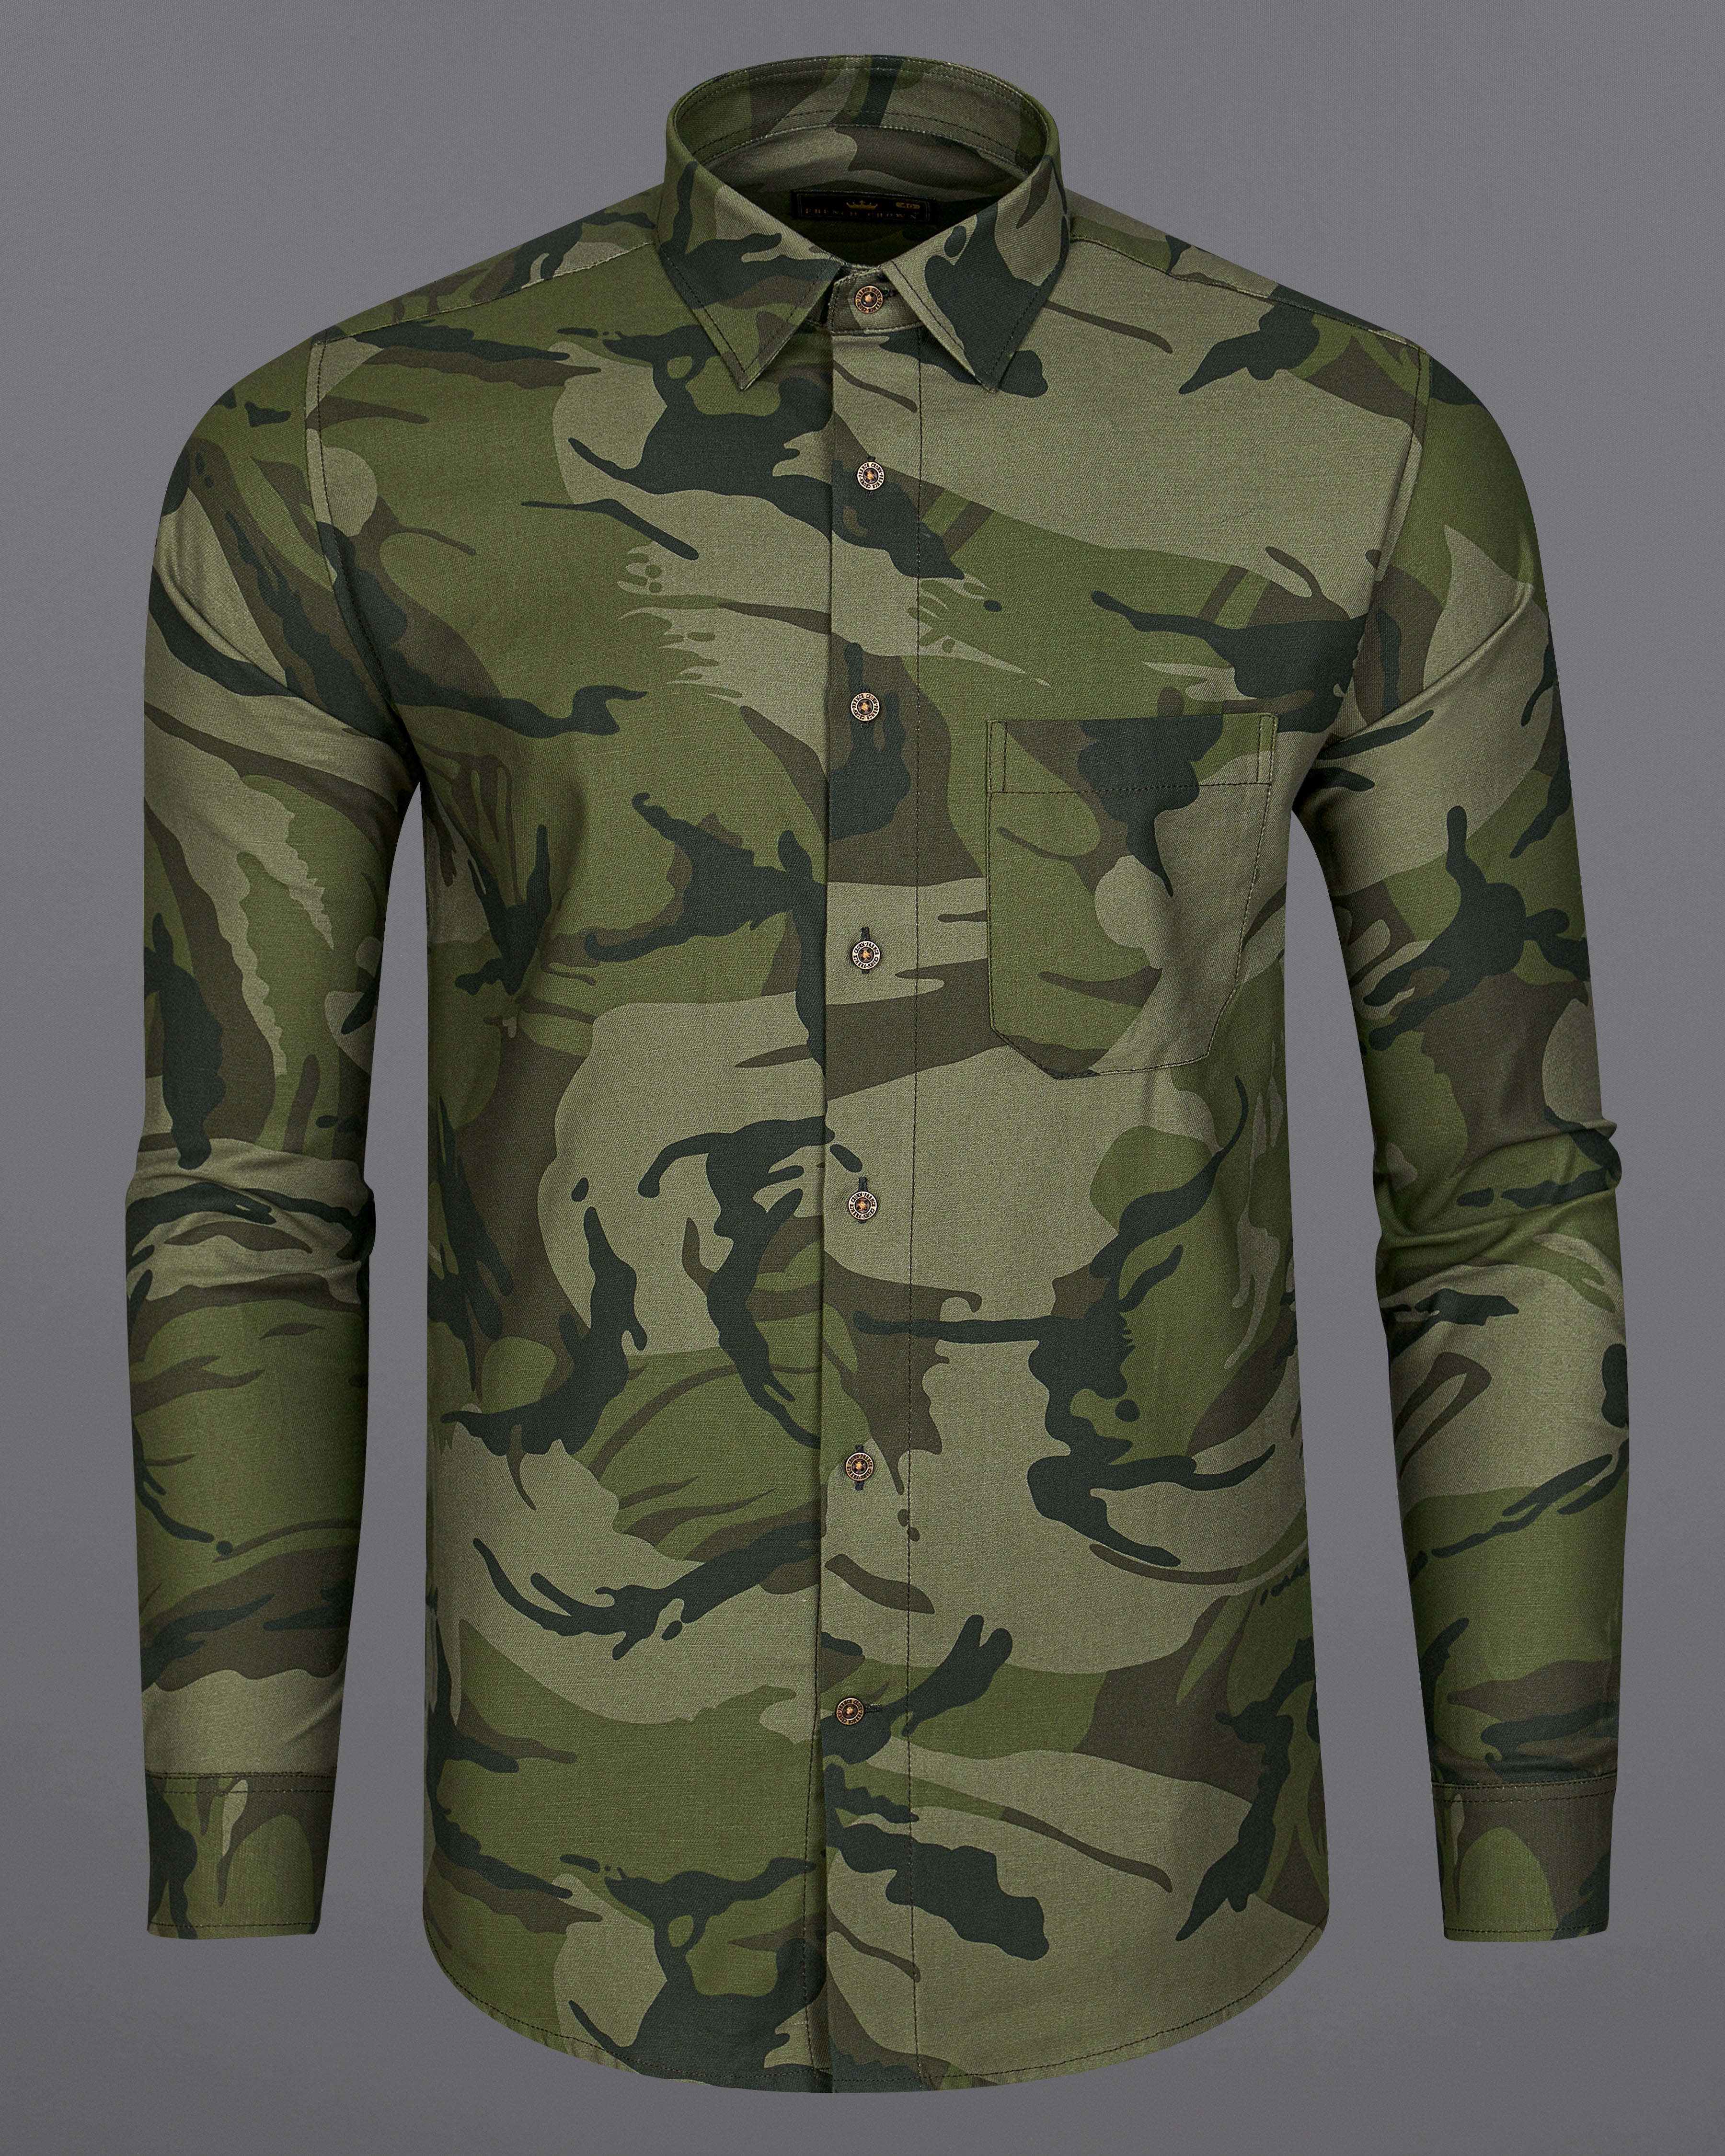 Fuscous Green with Birch Dark Green Camouflage Printed Royal Oxford Shirt 8913-MB-38, 8913-MB-H-38,  8913-MB-39,  8913-MB-H-39,  8913-MB-40,  8913-MB-H-40,  8913-MB-42,  8913-MB-H-42,  8913-MB-44,  8913-MB-H-44,  8913-MB-46,  8913-MB-H-46,  8913-MB-48,  8913-MB-H-48,  8913-MB-50,  8913-MB-H-50,  8913-MB-52,  8913-MB-H-52